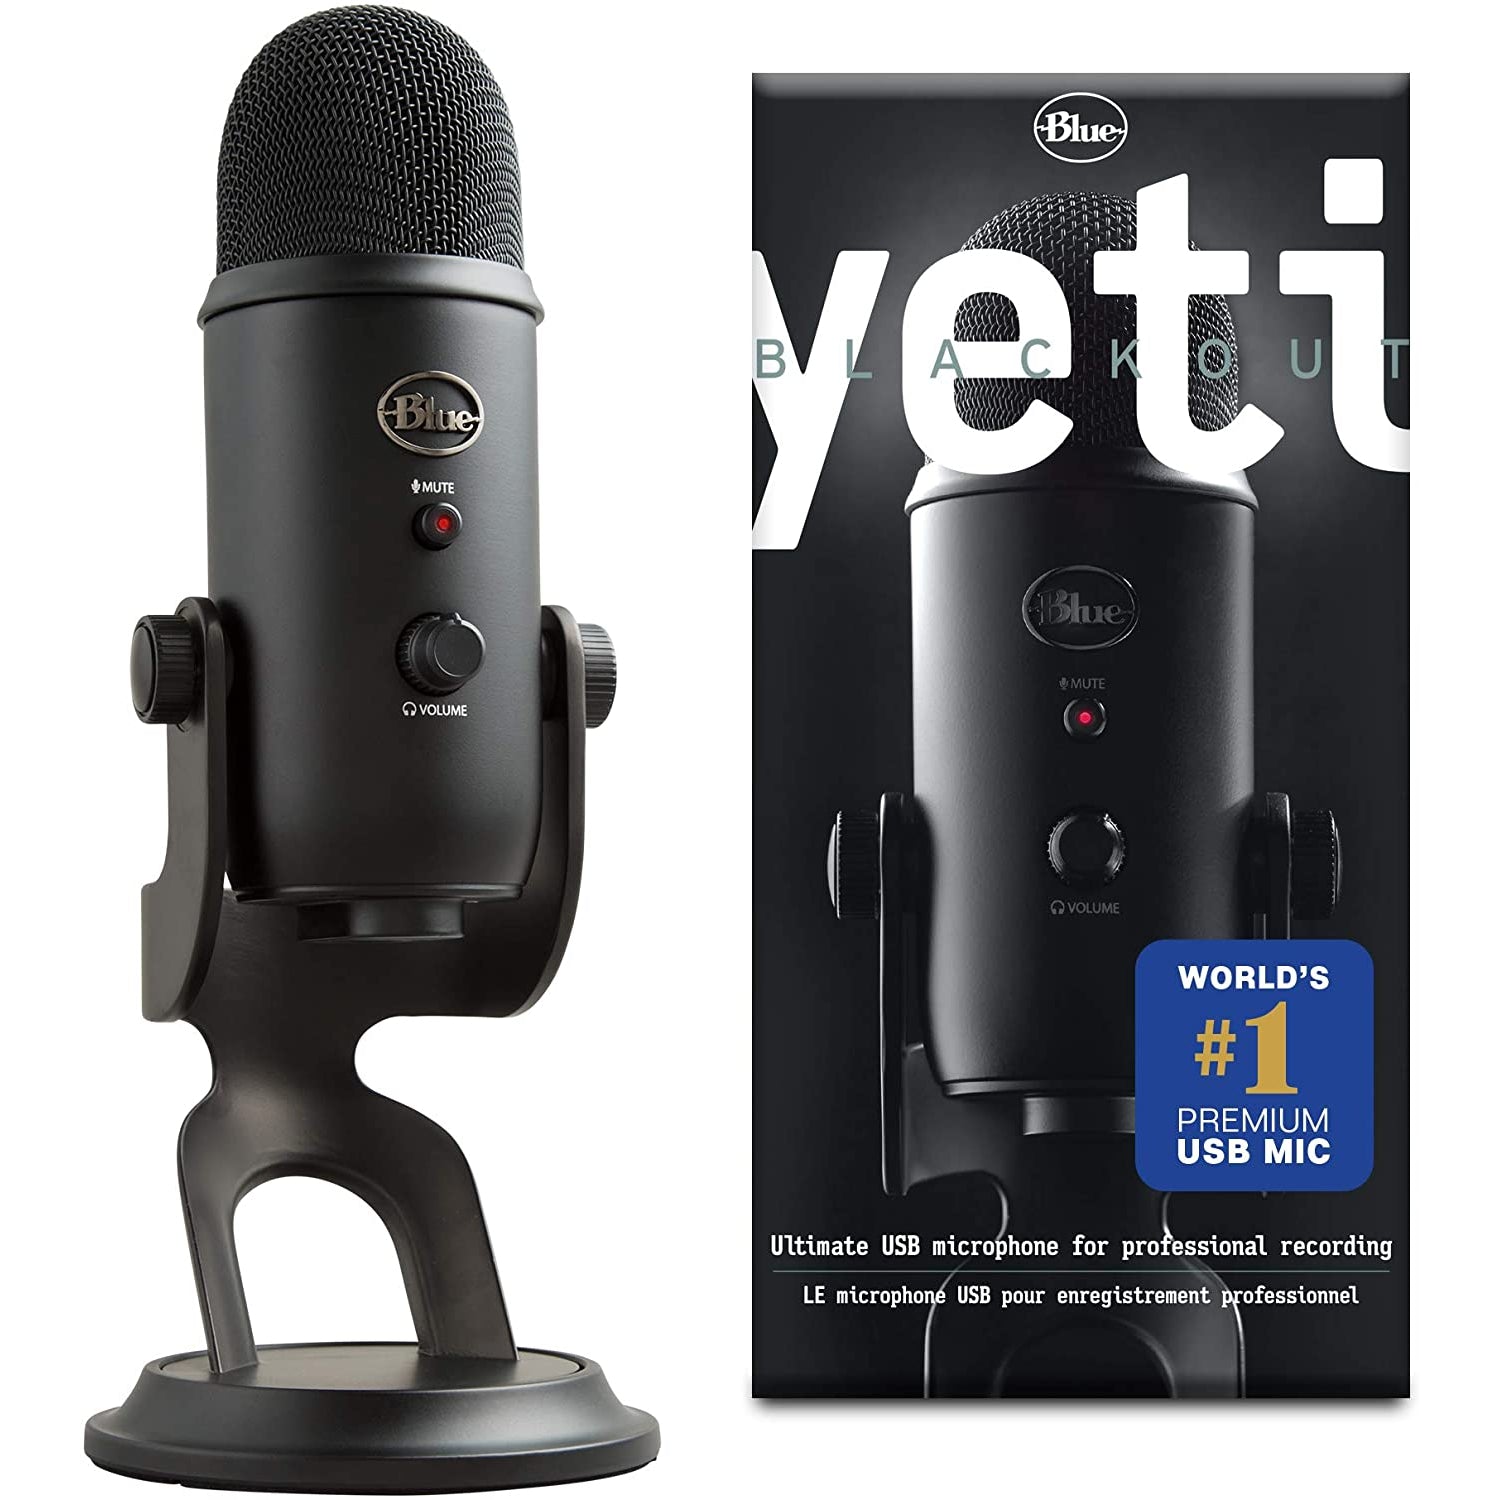 Blue Microphone Yeti Professional USB Microphone For Recording, Streaming, Podcasting, Broadcasting, Gaming, VOICE overs, and More